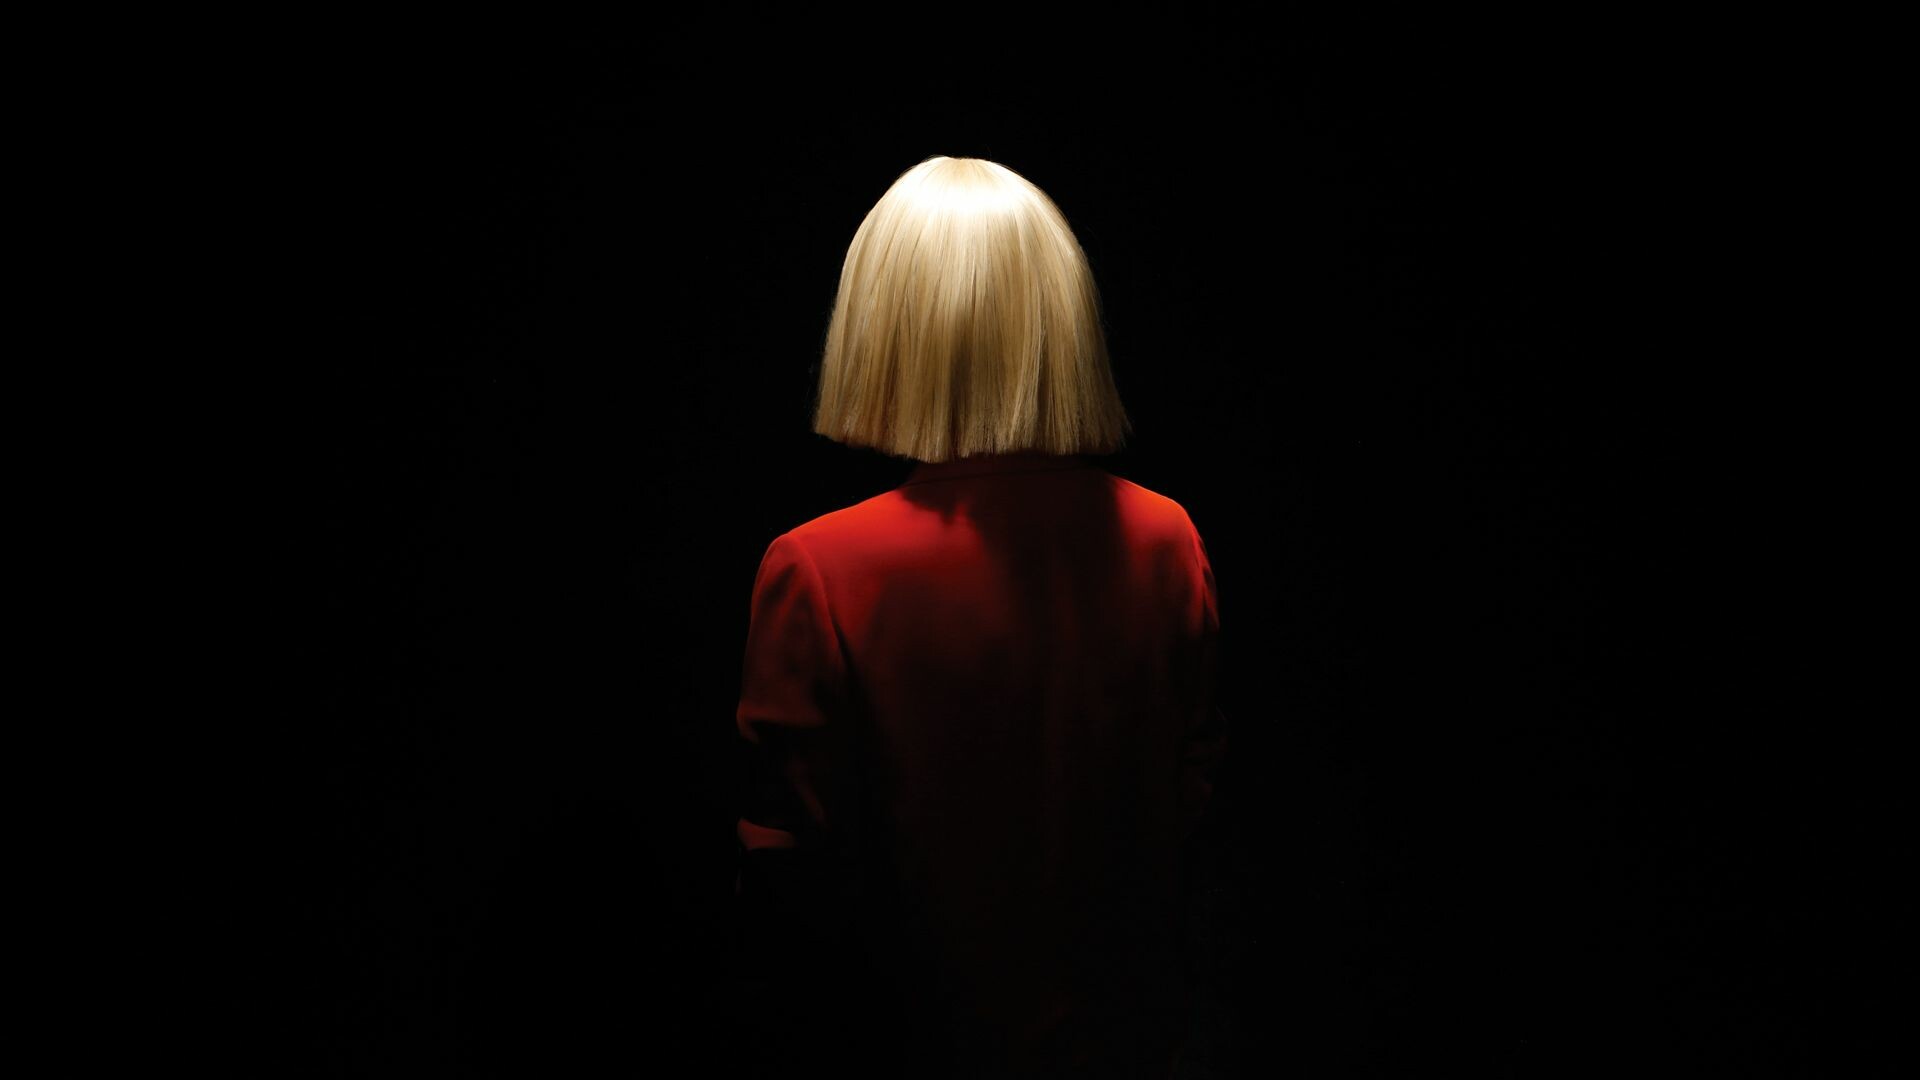 Sia: "You've Changed" was given away for free and was released on 28 December 2009. 1920x1080 Full HD Wallpaper.